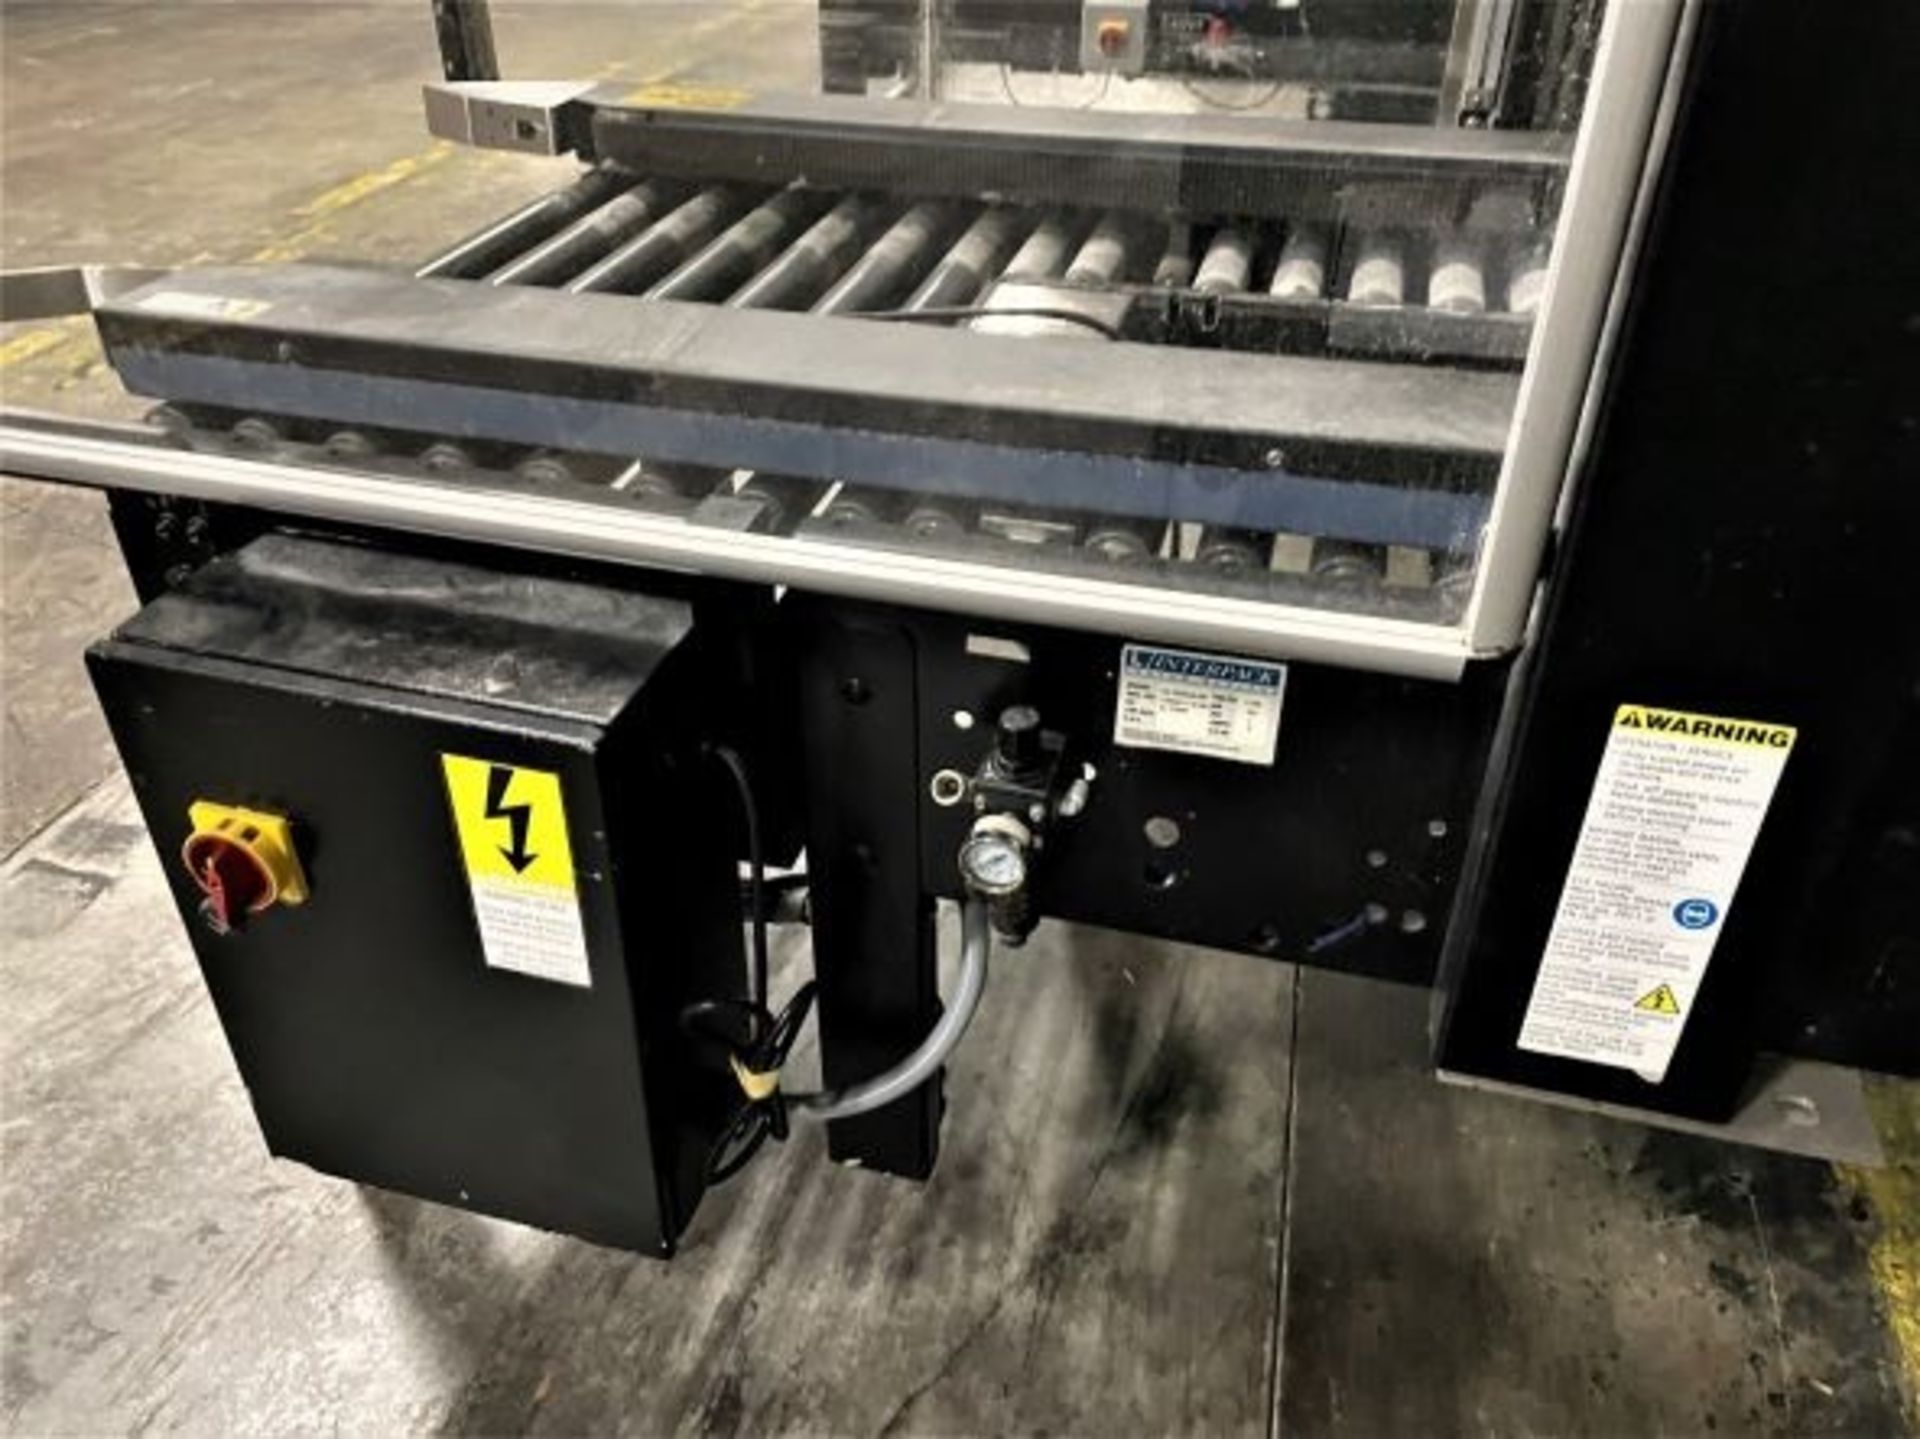 Interpack Top and Bottom Case Sealer Taper, Model UA 262024-B, S/N TM09511 E 001 with Autoflap, - Image 3 of 8